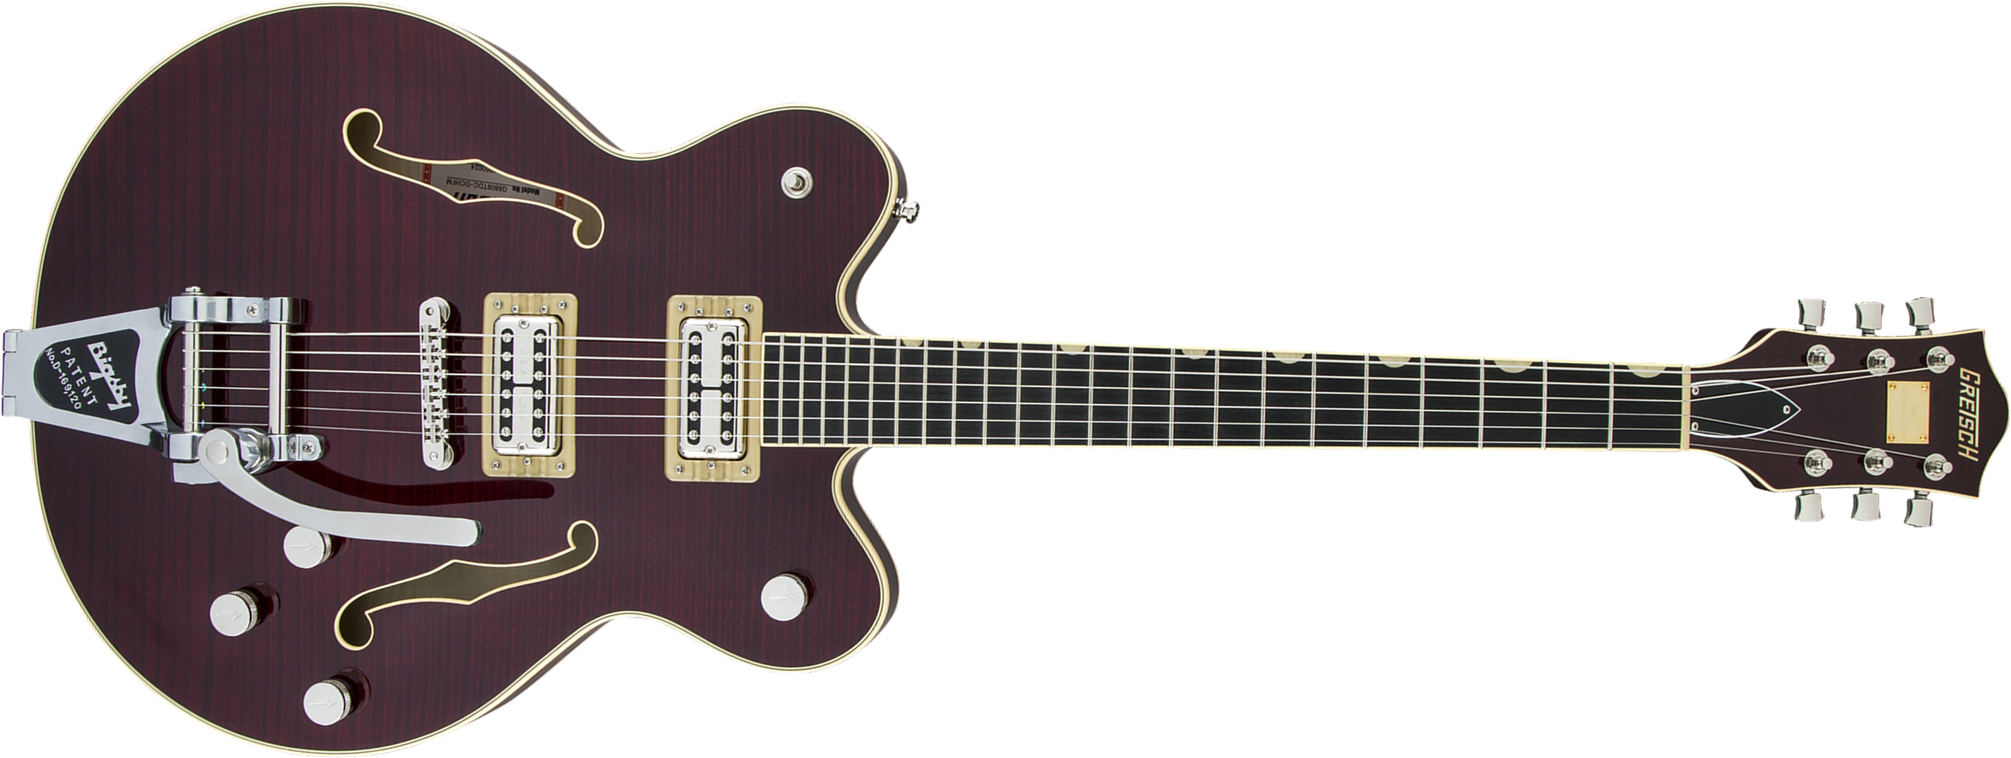 Gretsch G6609tfm Broadkaster Center Bloc Dc Players Edition Pro Jap Bigsby Eb - Dark Cherry Stain - Guitare Électrique 1/2 Caisse - Main picture